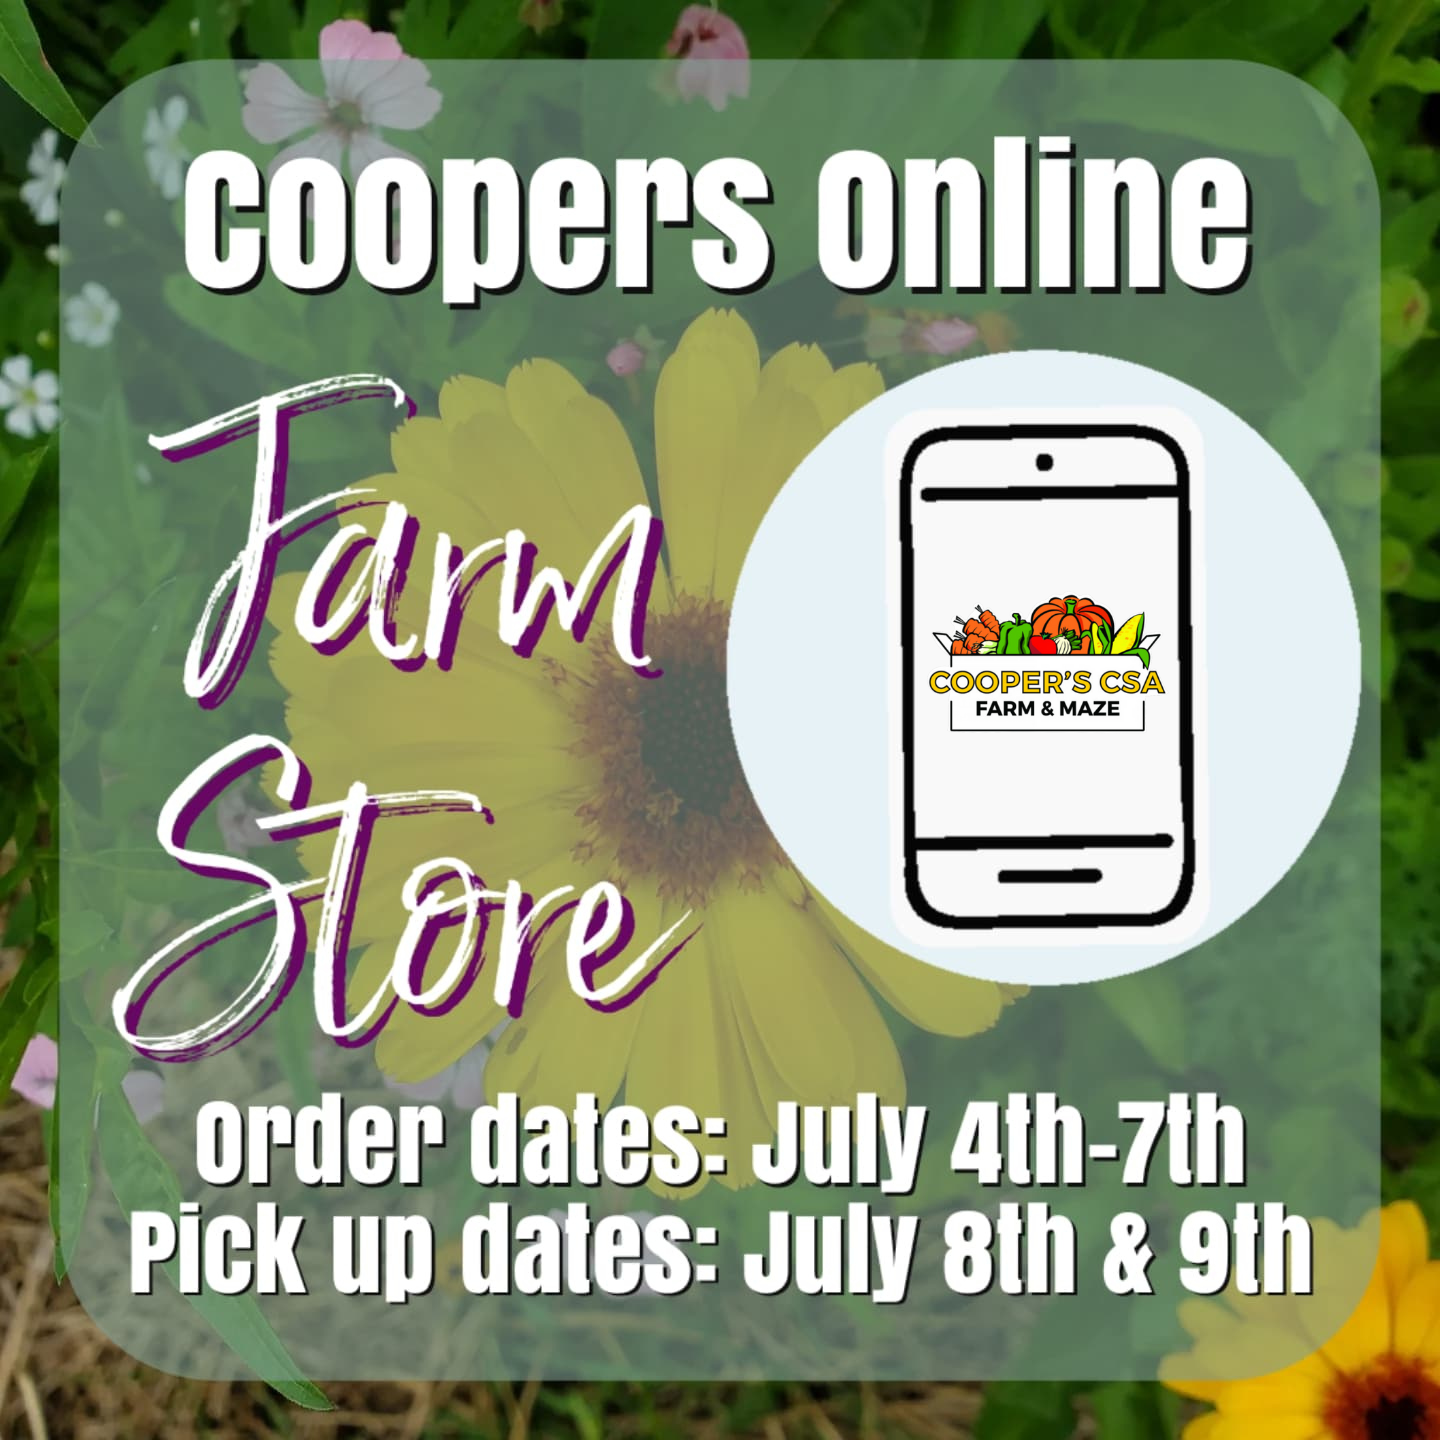 Previous Happening: Coopers Online Farm Stand- July 4th-9th